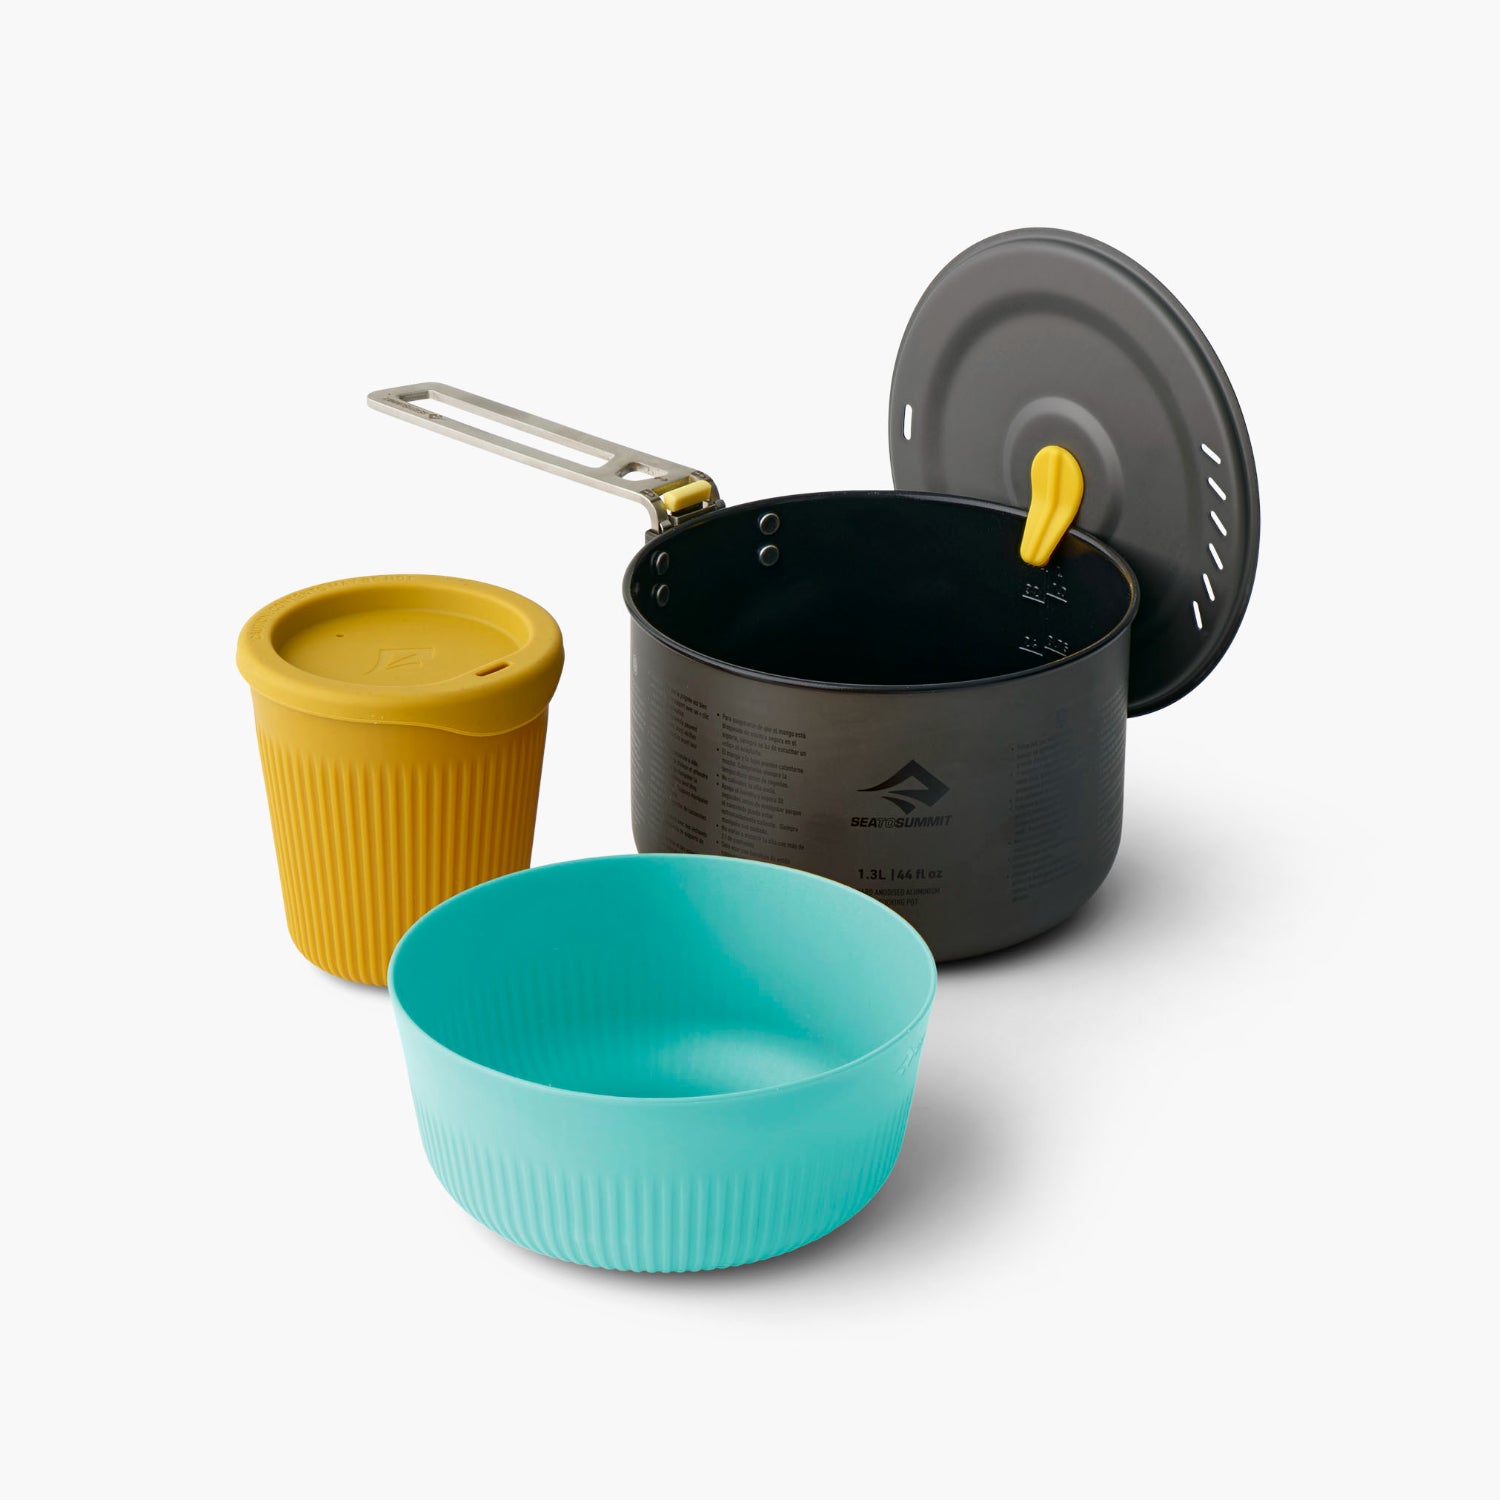 Sea to Summit Frontier Ultralight One Pot Cook Set (1 Person 3 Piece)